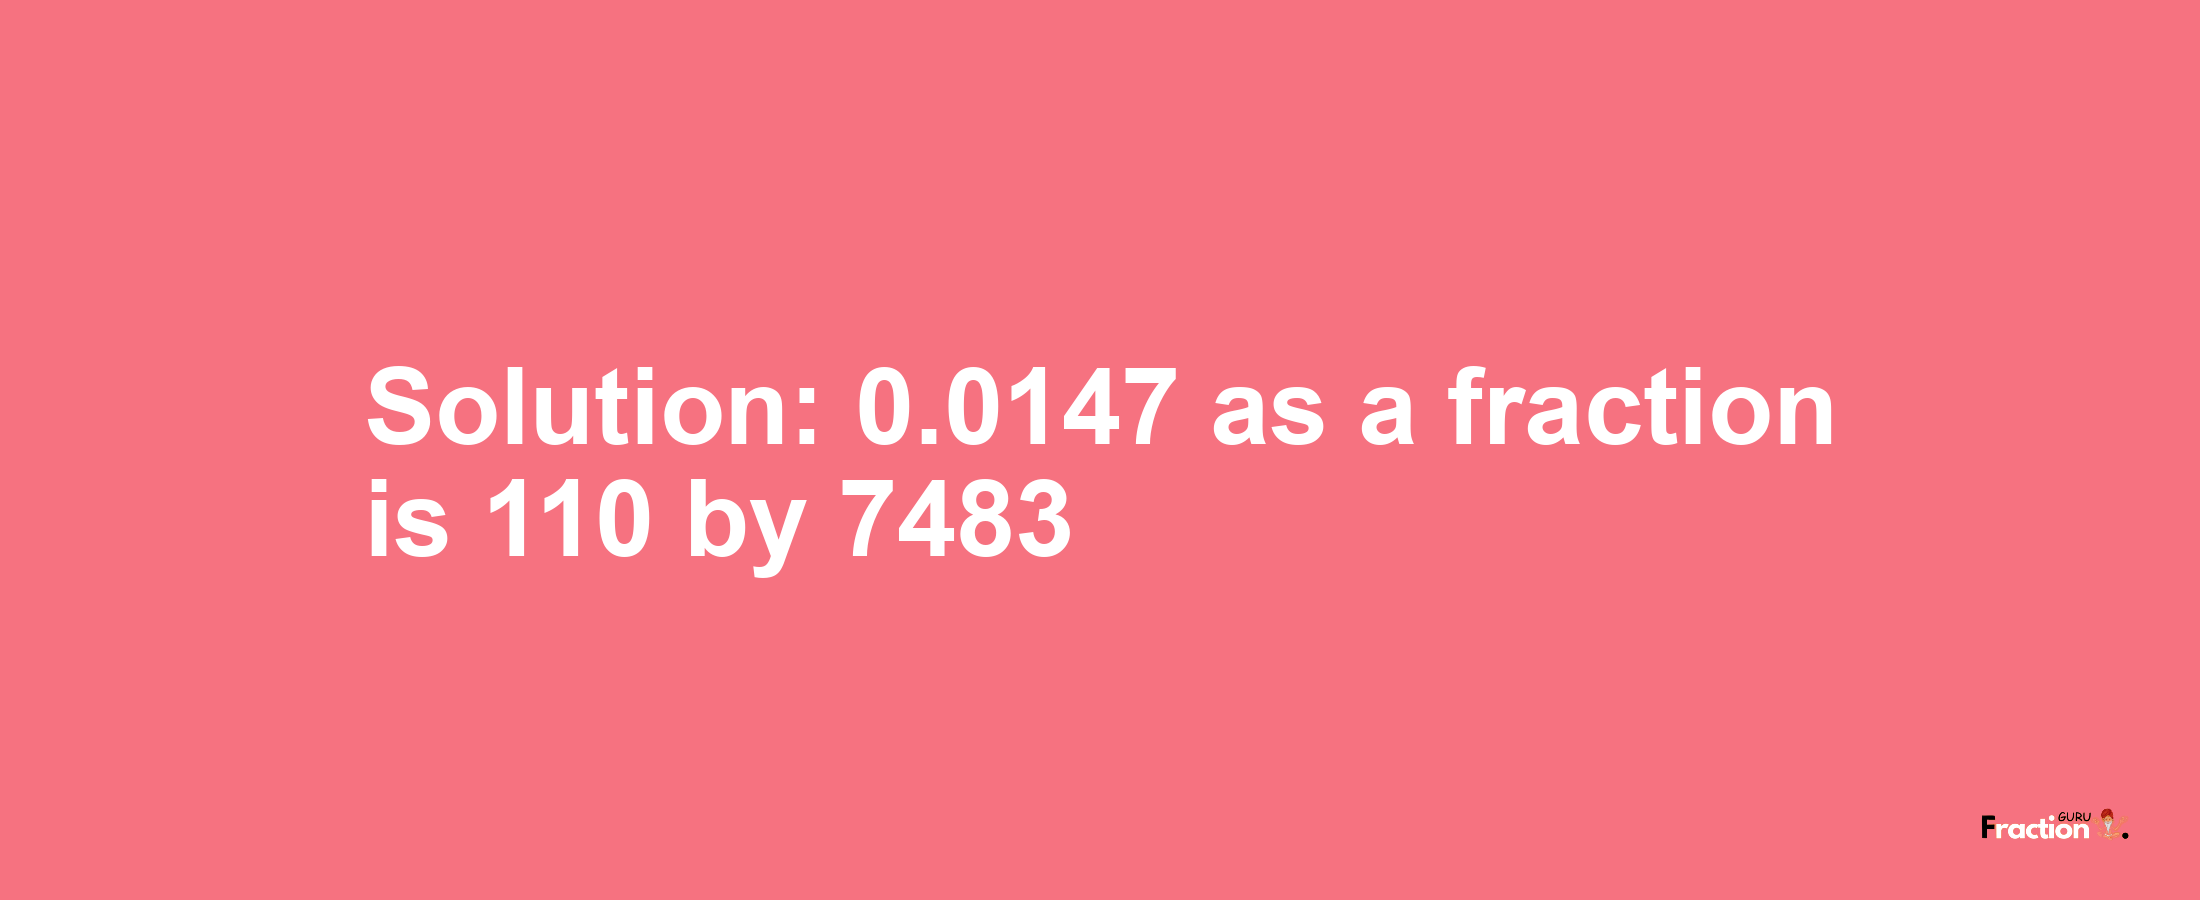 Solution:0.0147 as a fraction is 110/7483